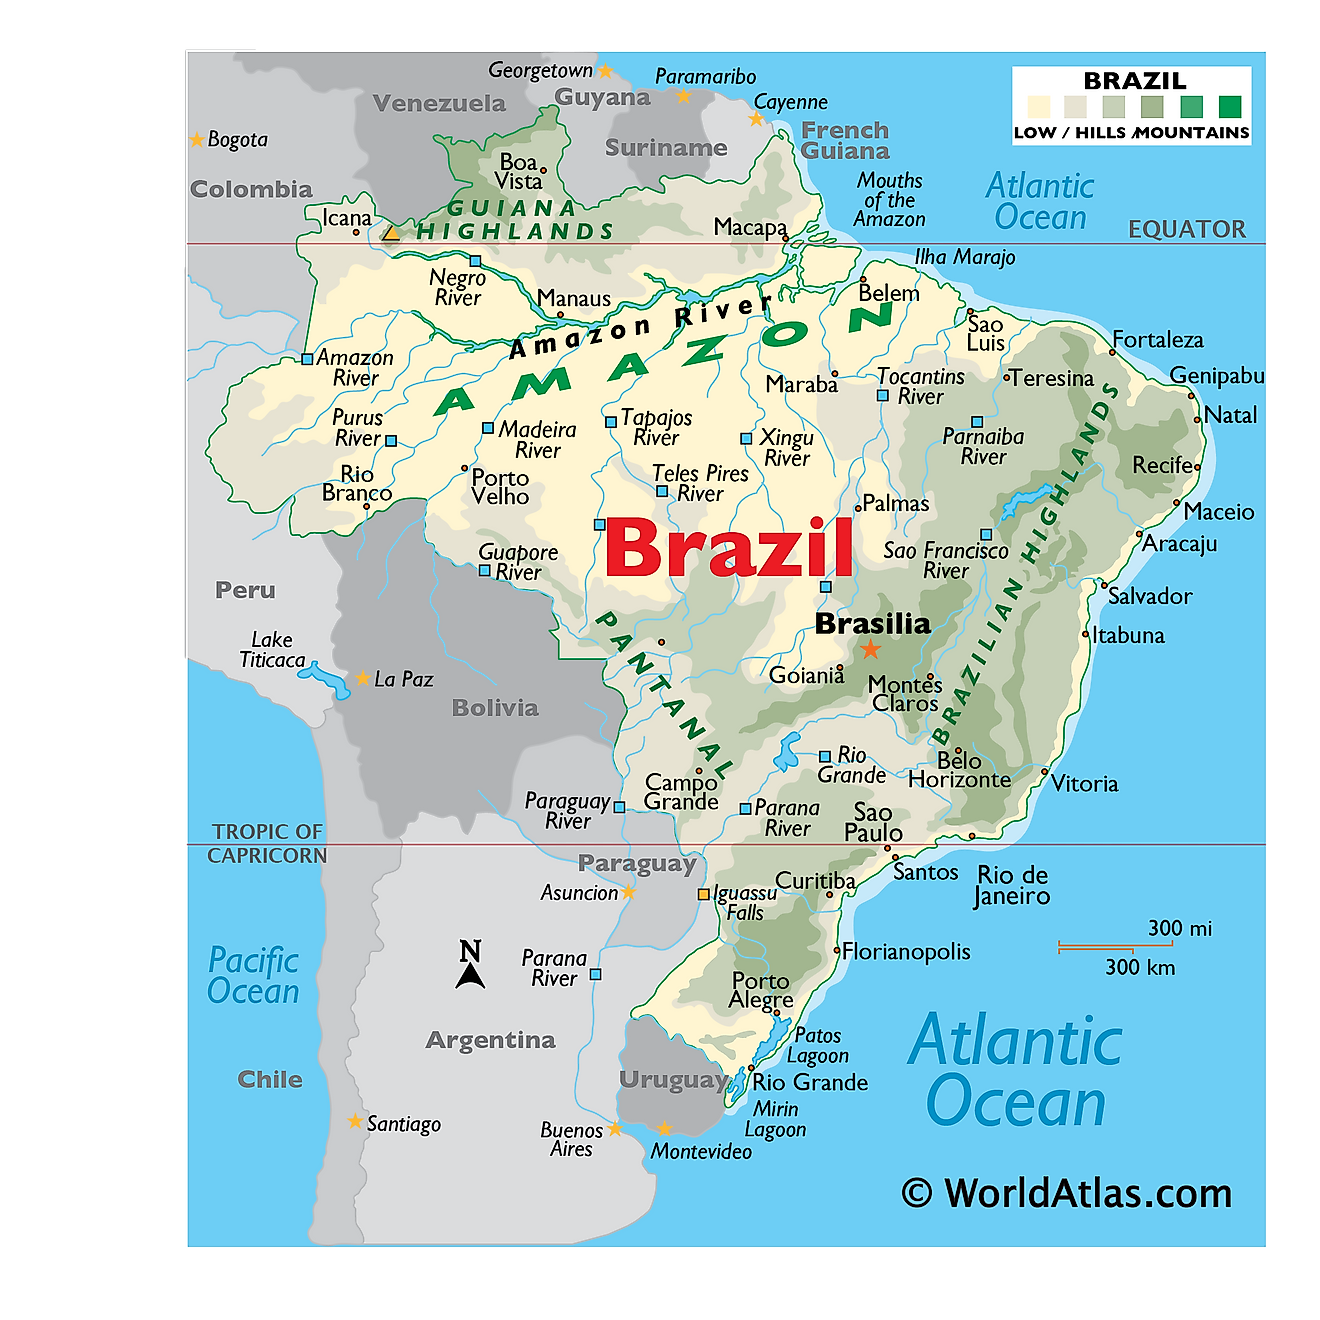 Physical Map of Brazil showing relief, rivers, mountains ranges, major lakes, important cities, bordering countries, and more.